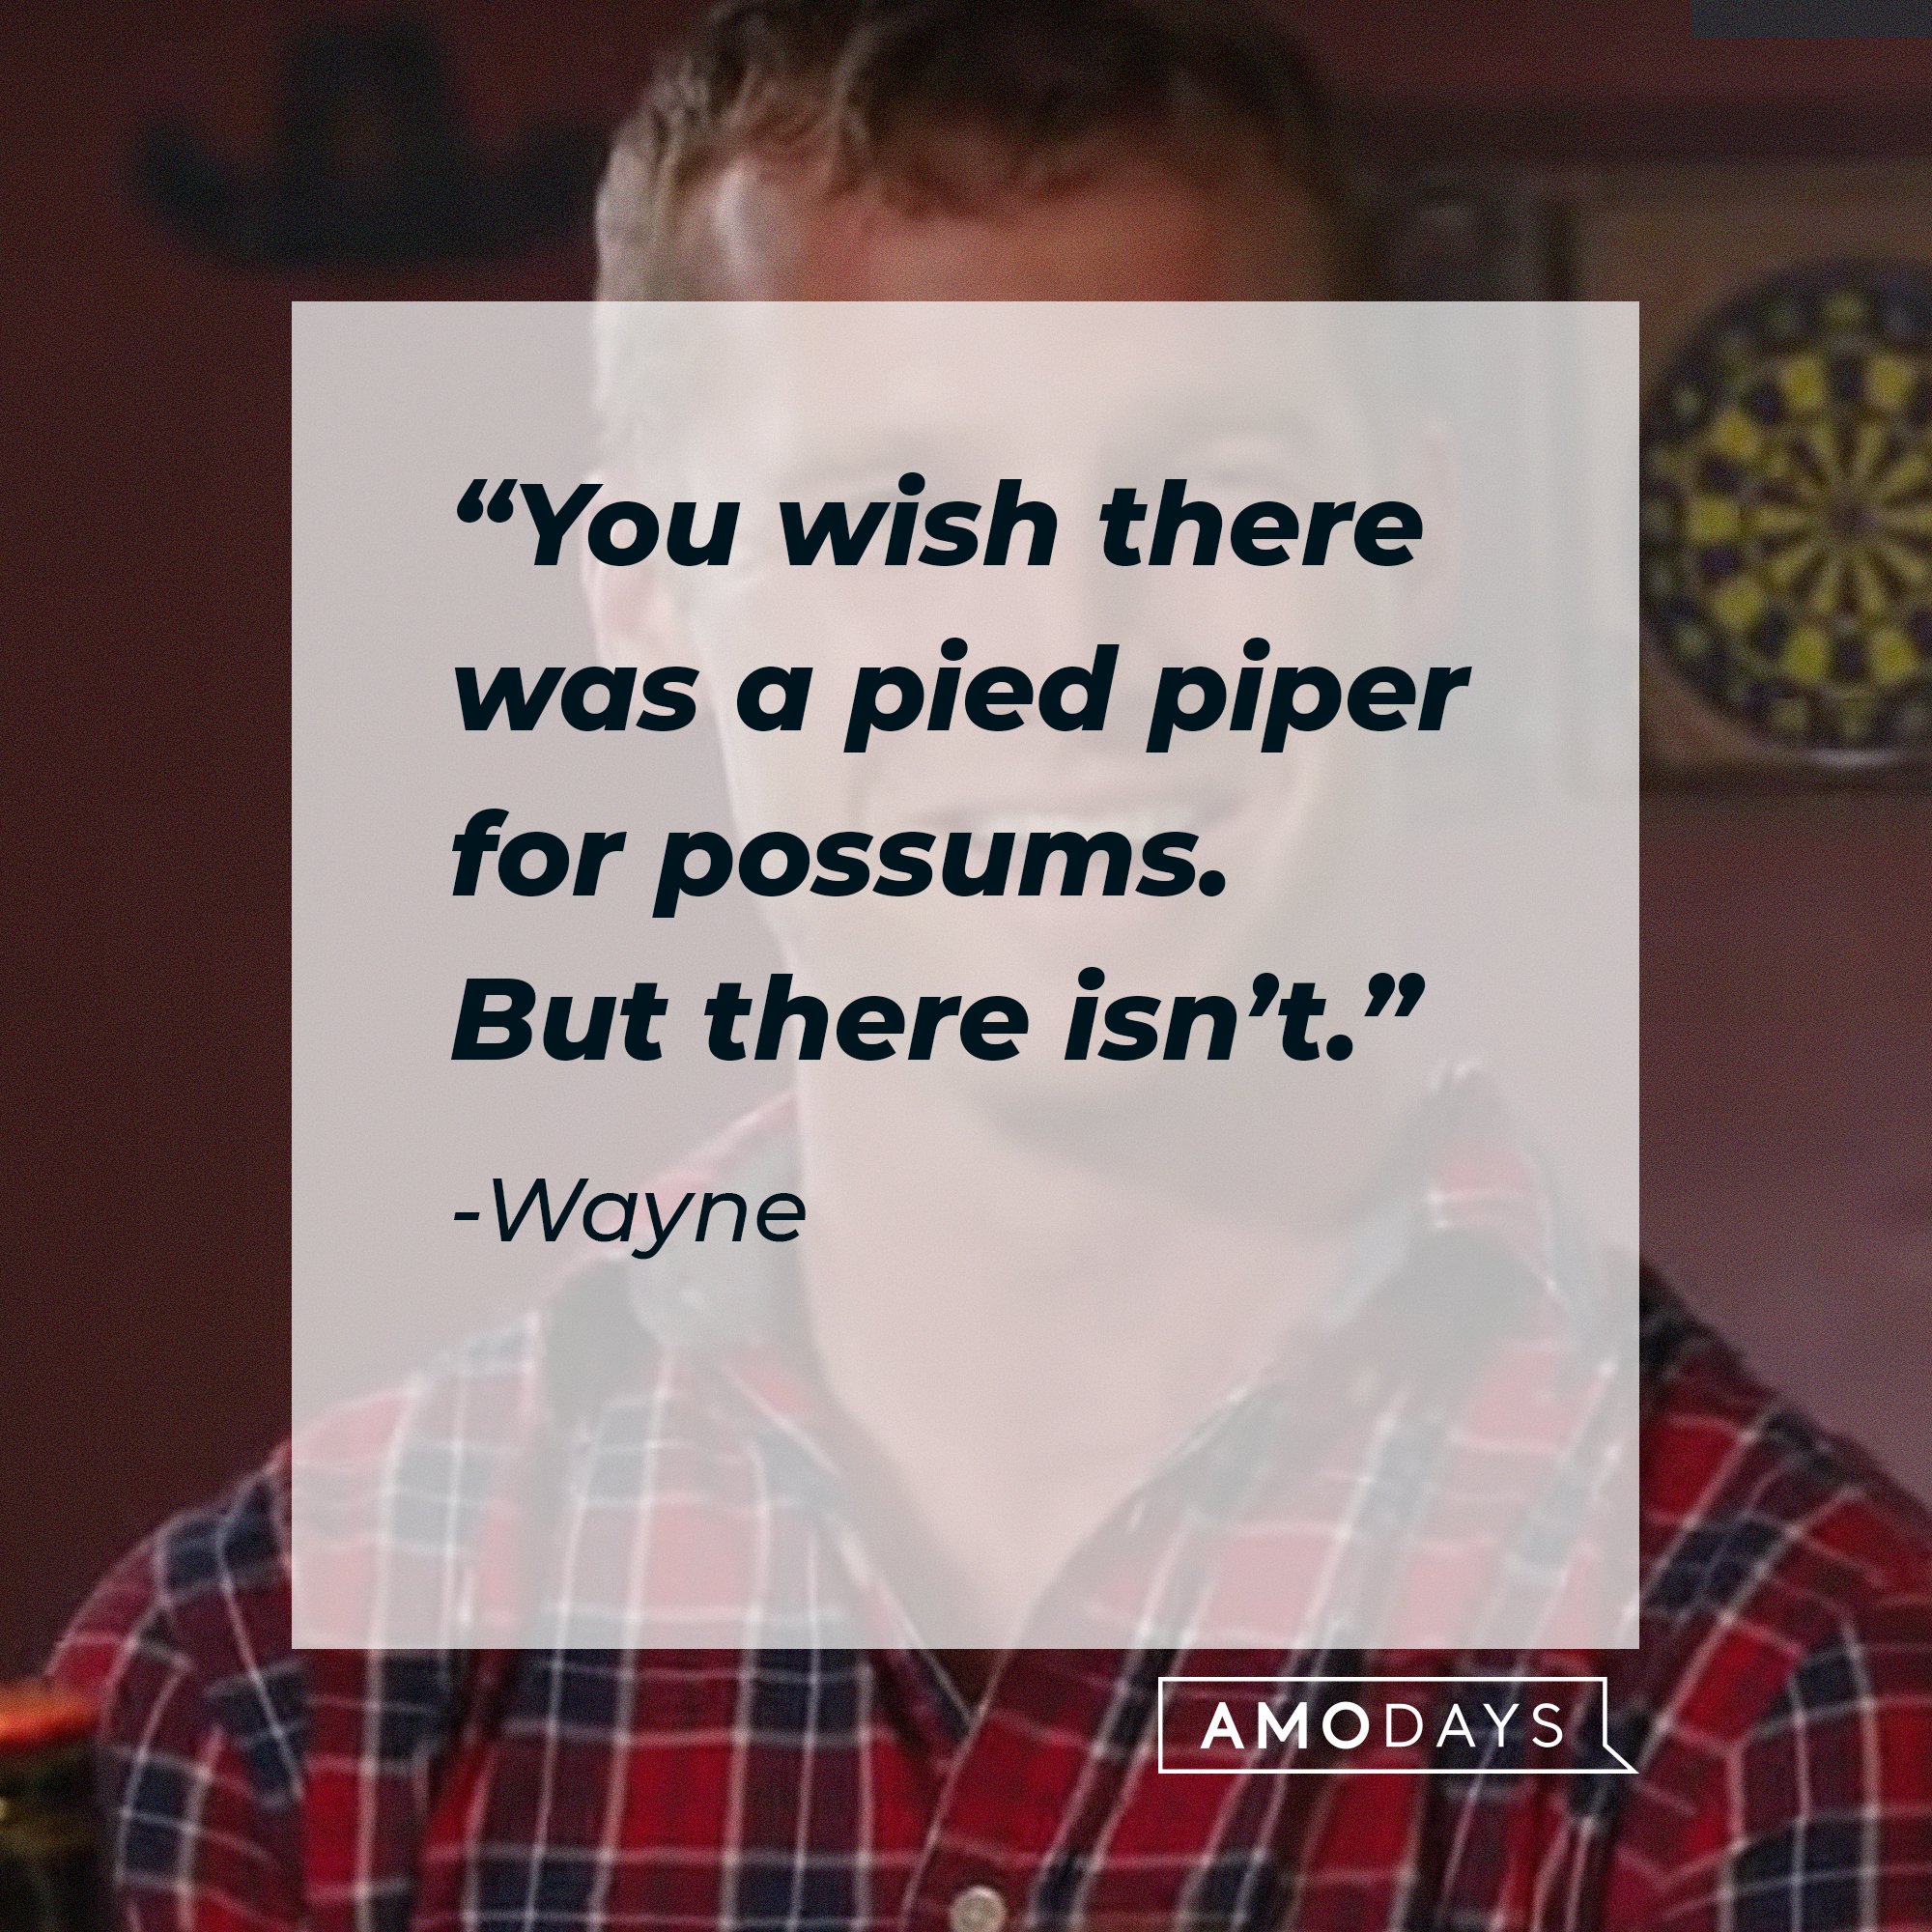 Wayne’s quote: “You wish there was a pied piper for possums. But there isn’t.” | Image: AmoDays